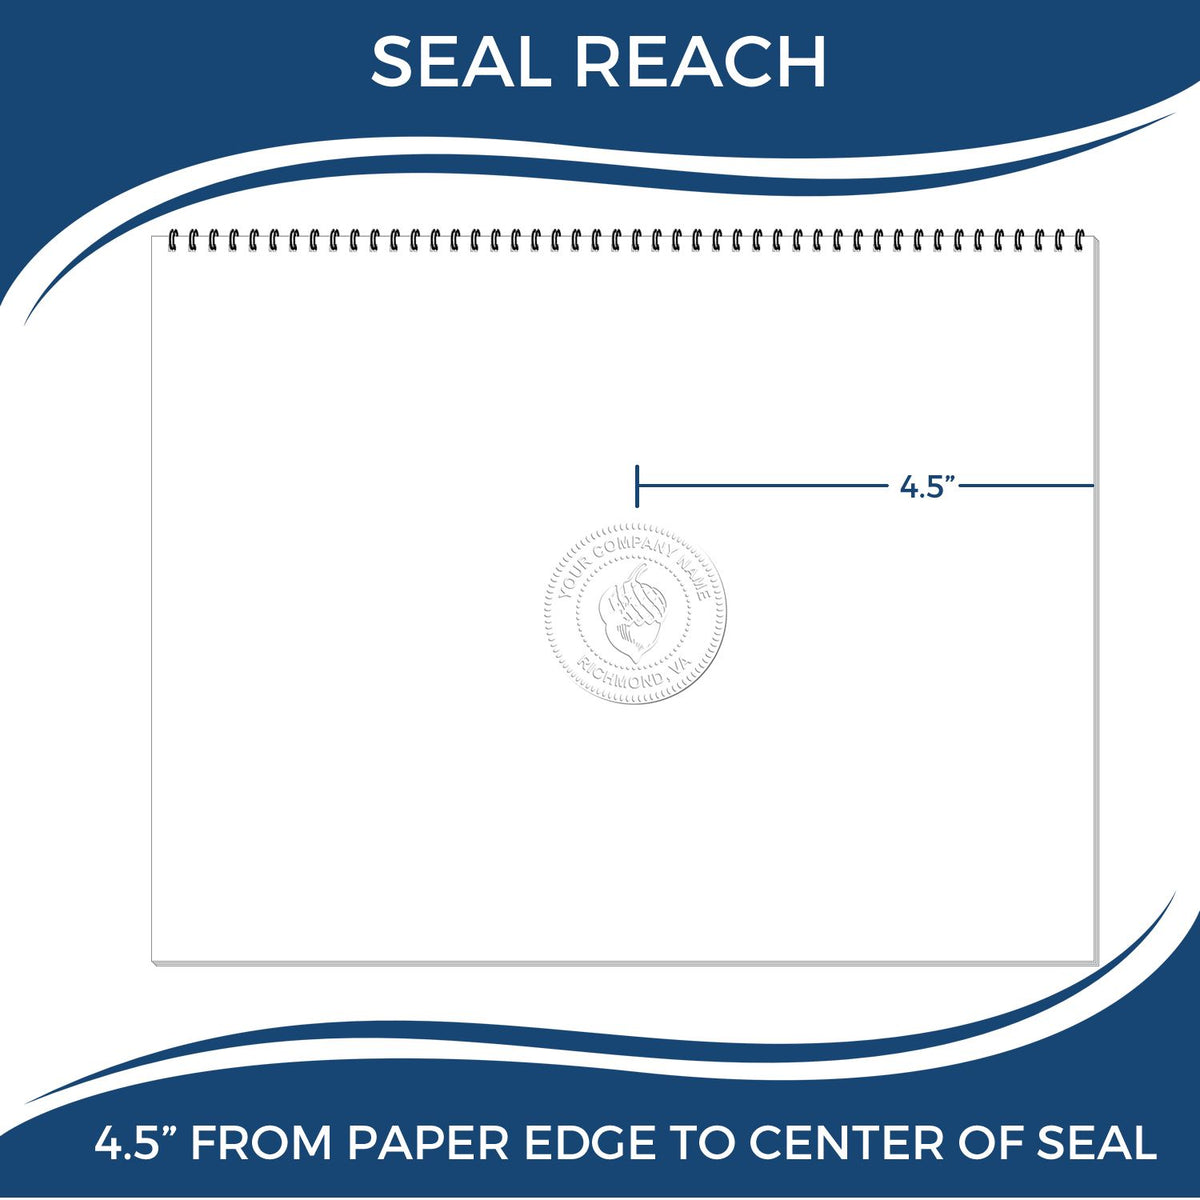 An infographic showing the seal reach which is represented by a ruler and a miniature seal image of the State of Washington Extended Long Reach Engineer Seal